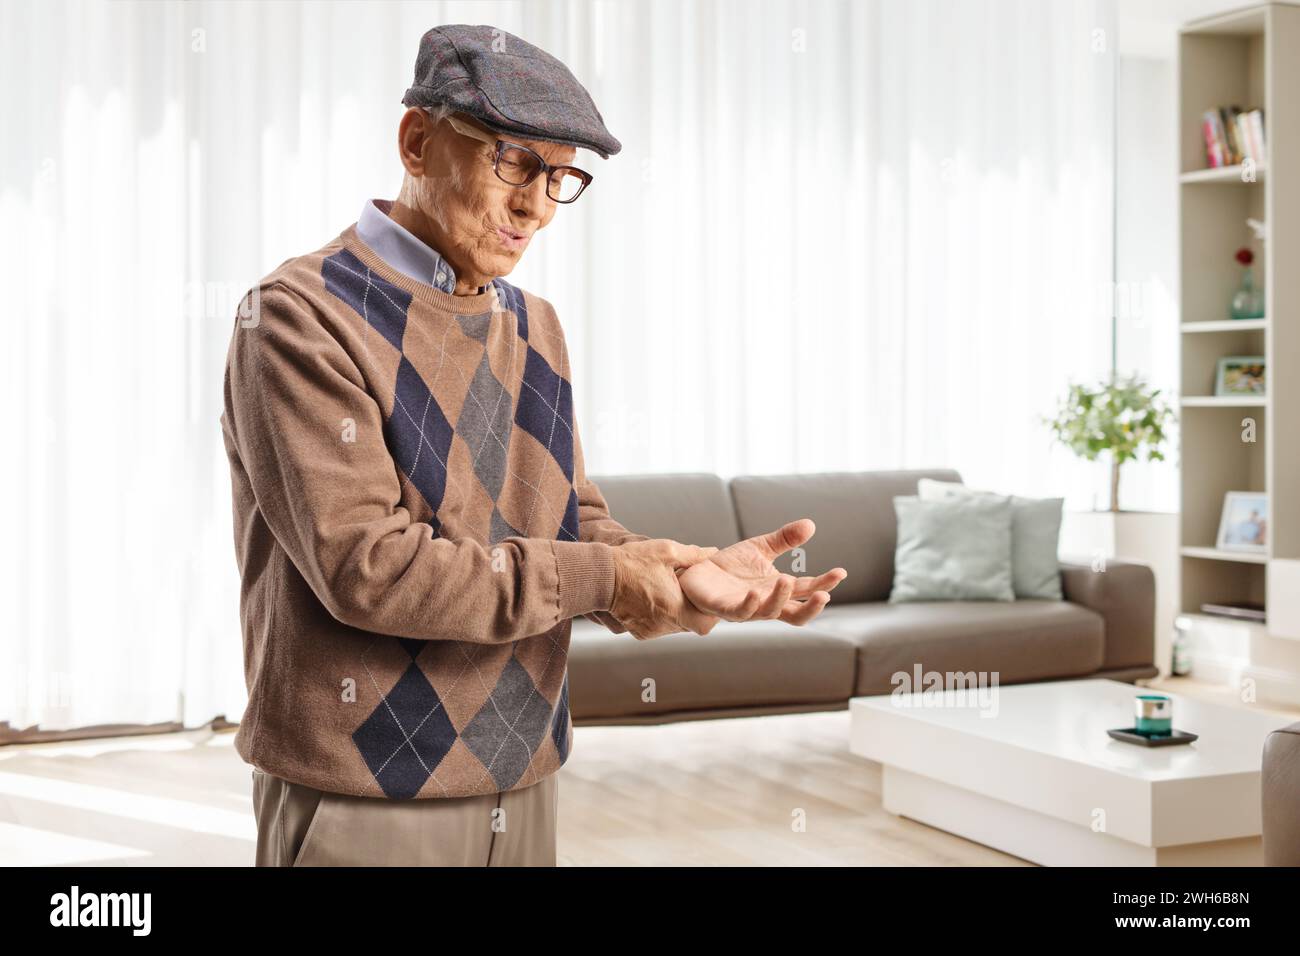 Elderly man in pain holding his wrist at home in a living room Stock Photo